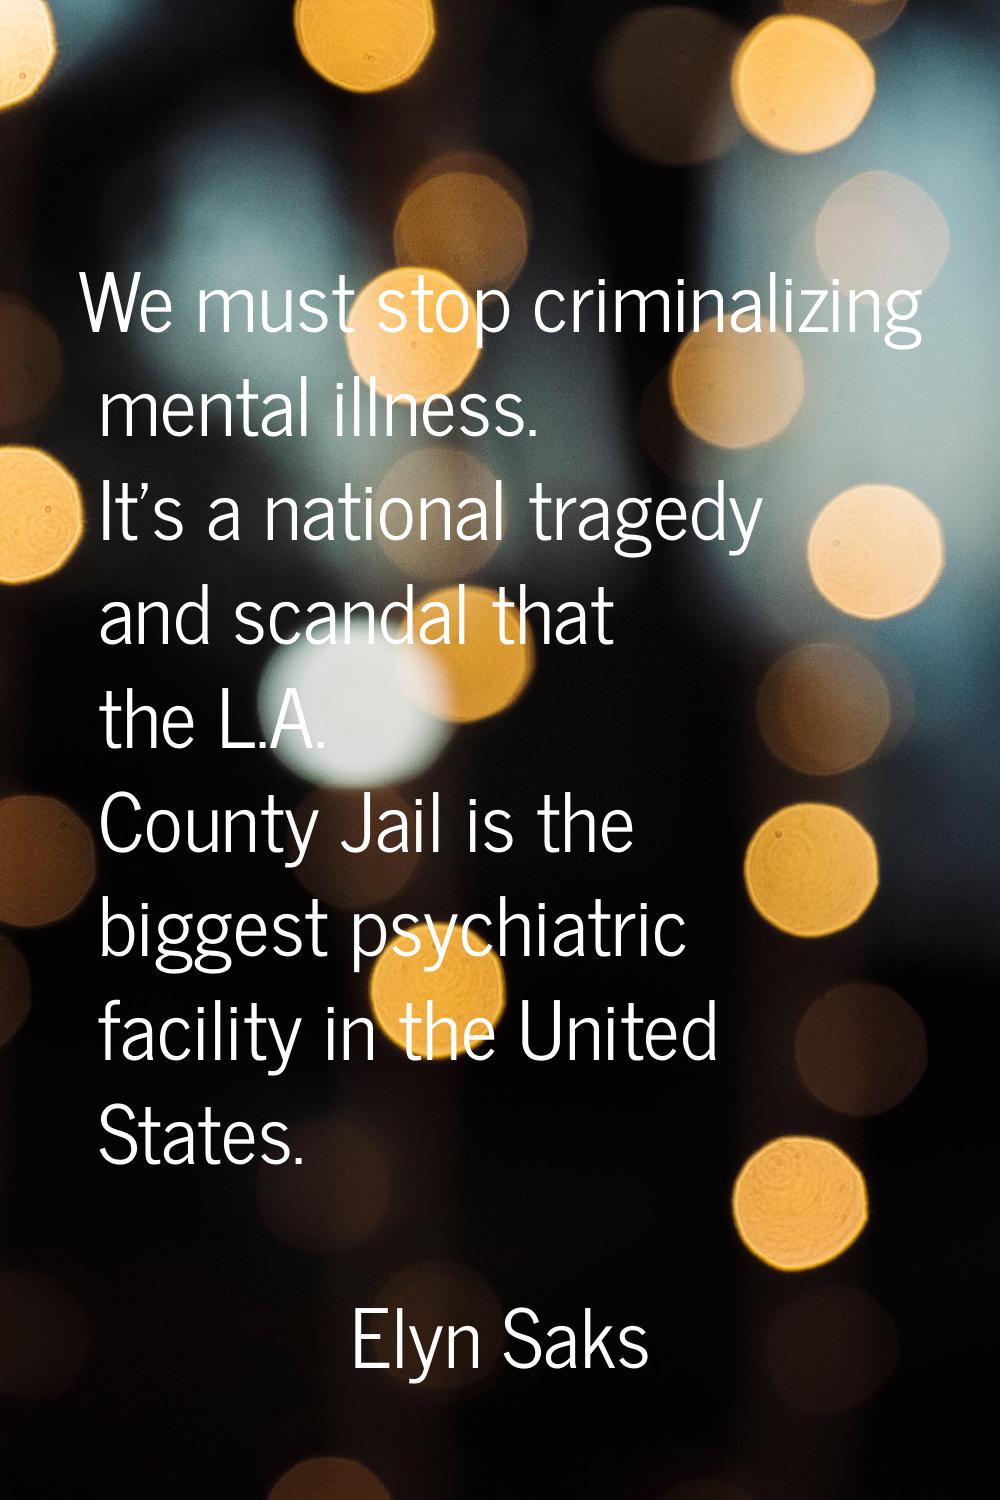 We must stop criminalizing mental illness. It's a national tragedy and scandal that the L.A. County